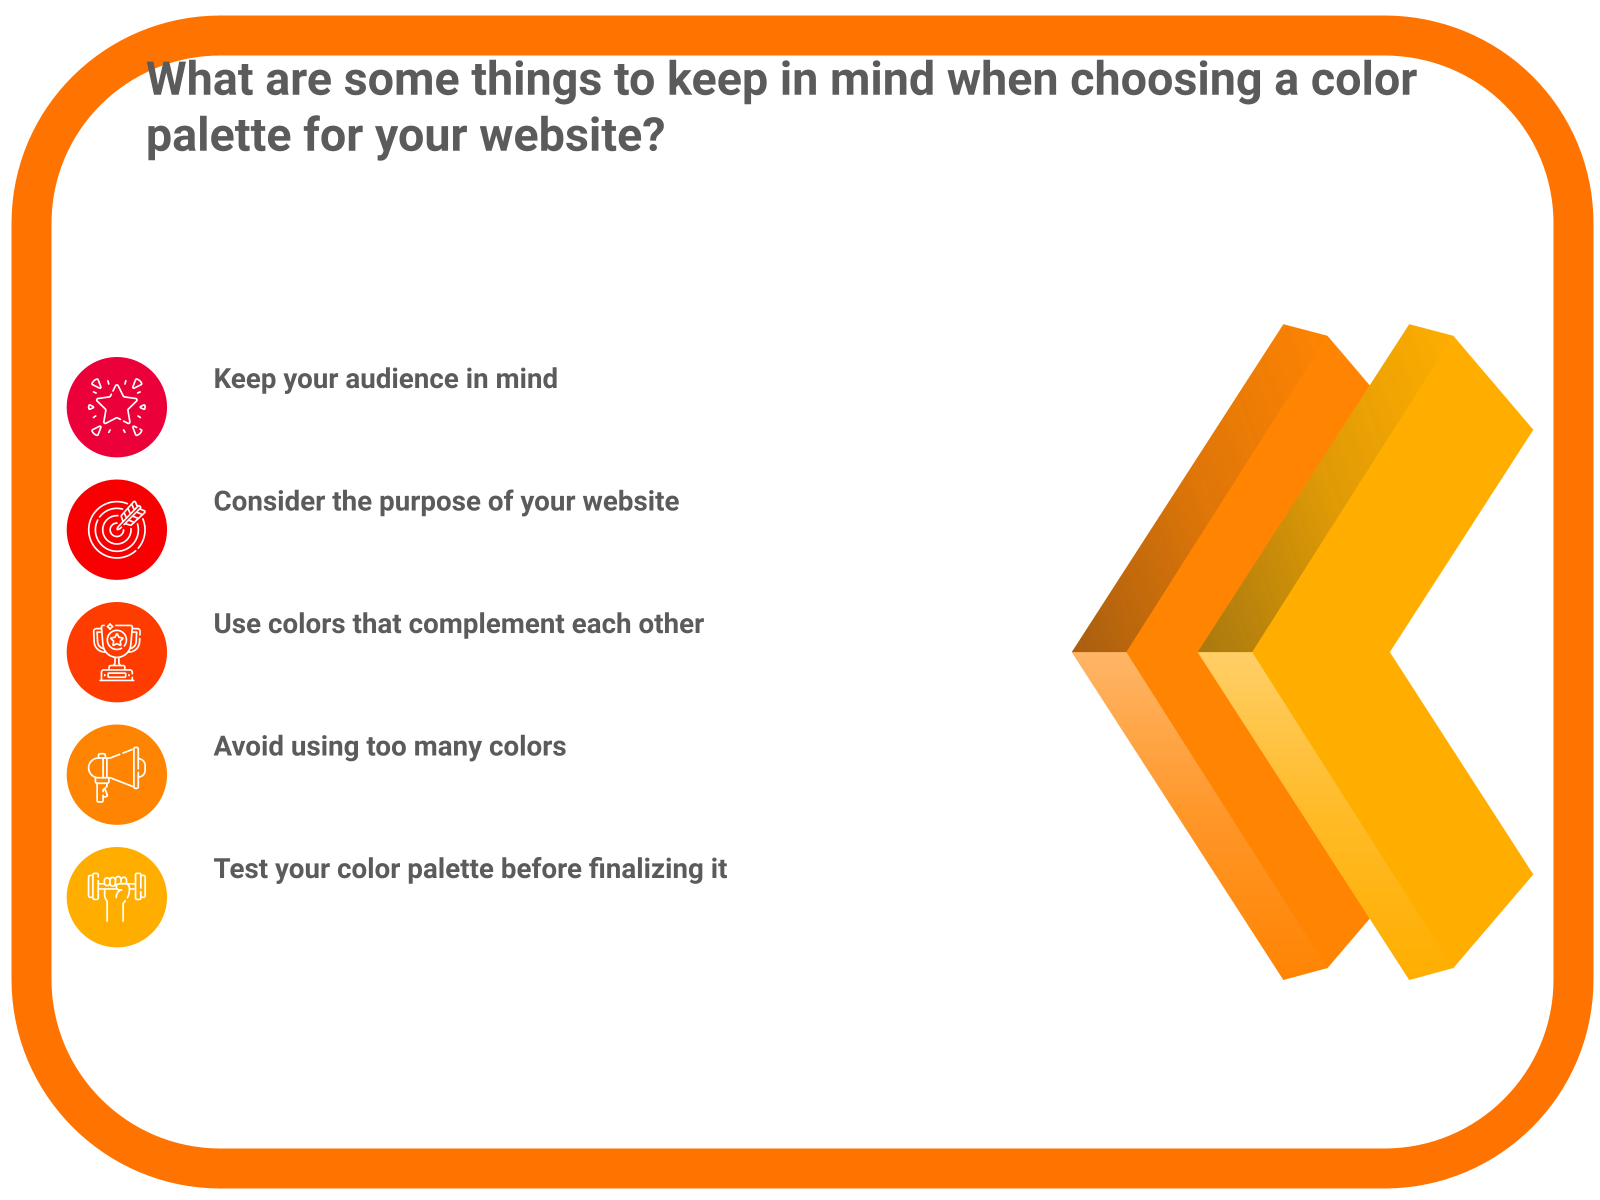 What are some things to keep in mind when choosing a color palette for your website?